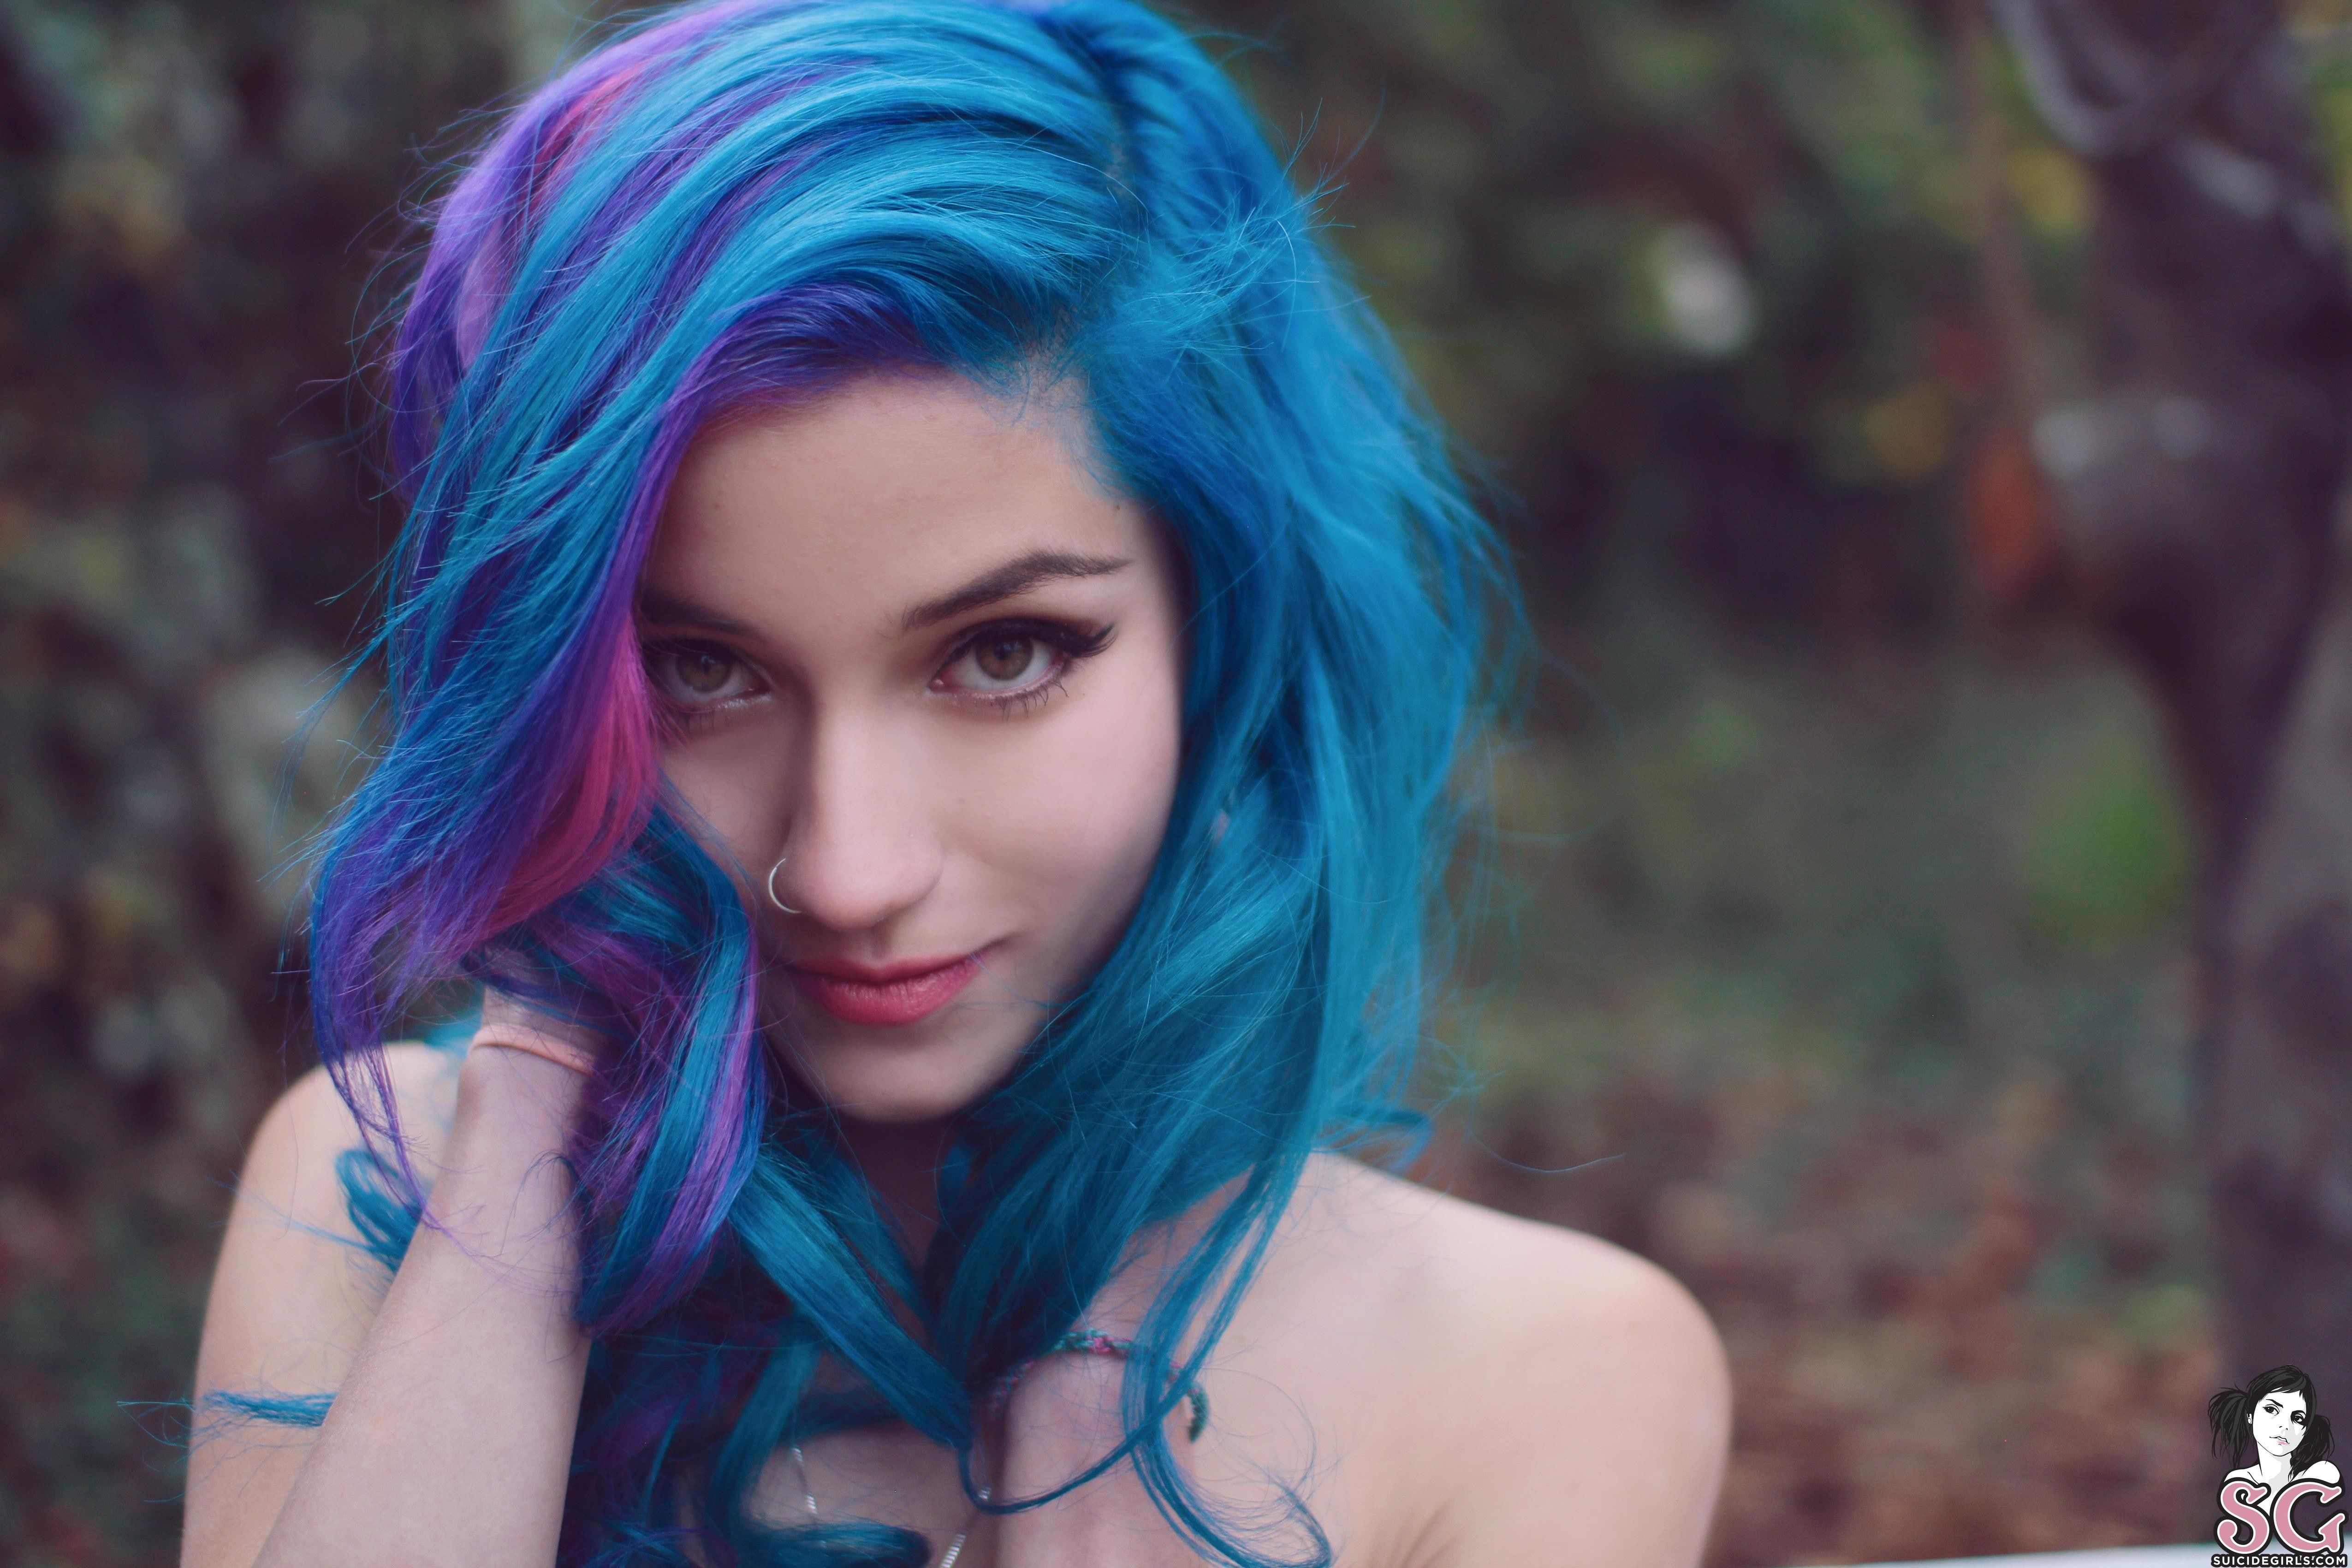 Blue hair girl with growing boobs - wide 3